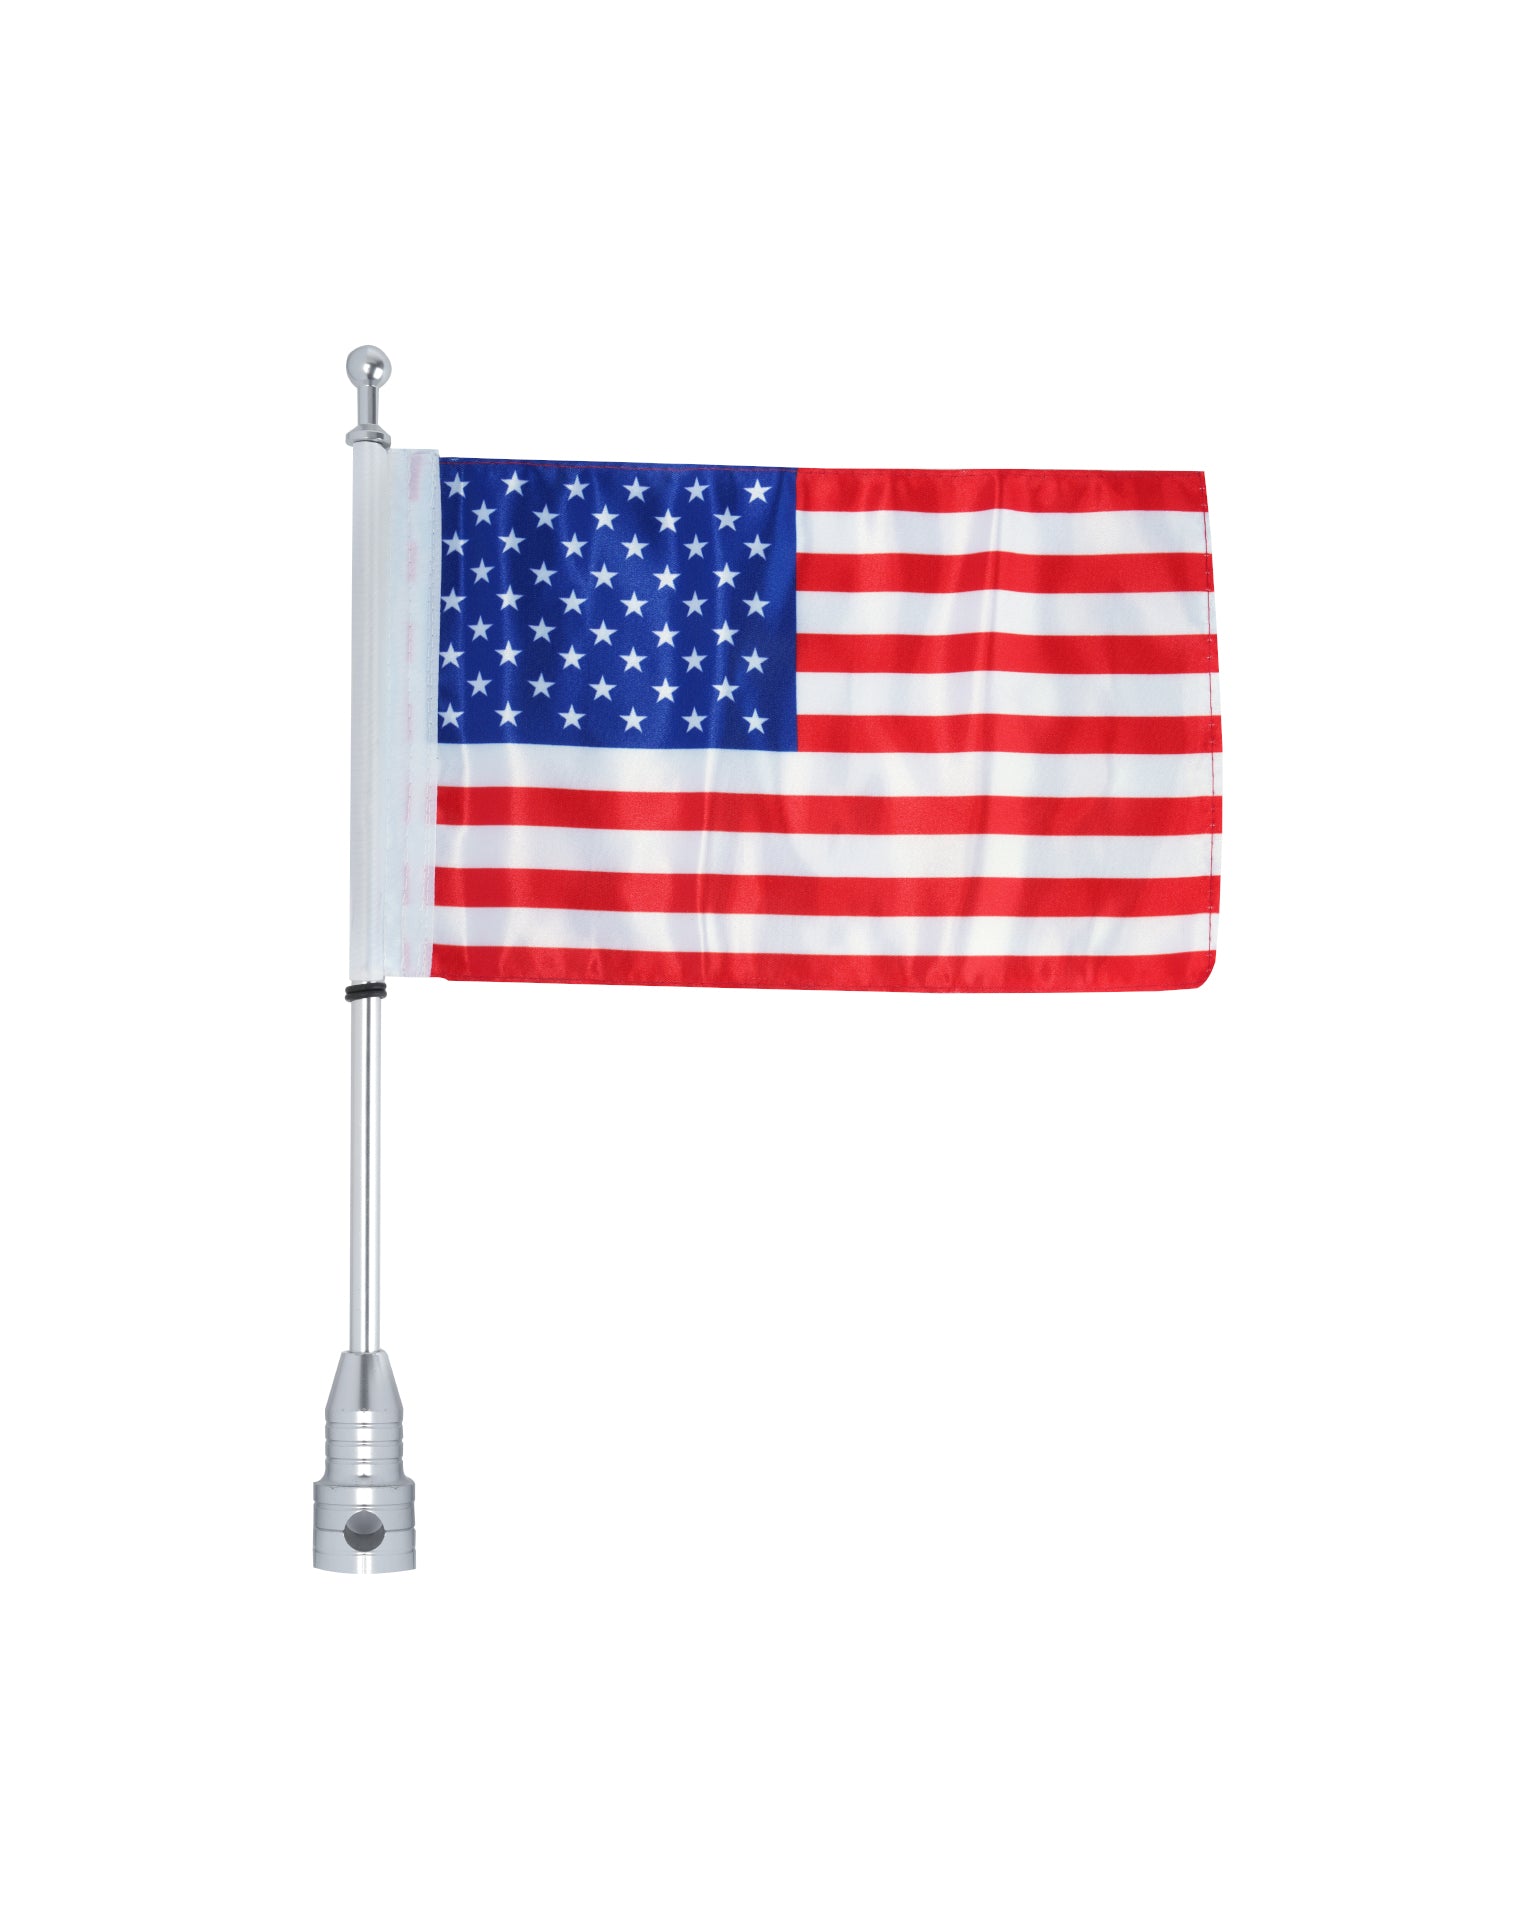 Motorcycle Flag Pole Mount and American Flag - Motorcycle Flag Holder -  VikingBags